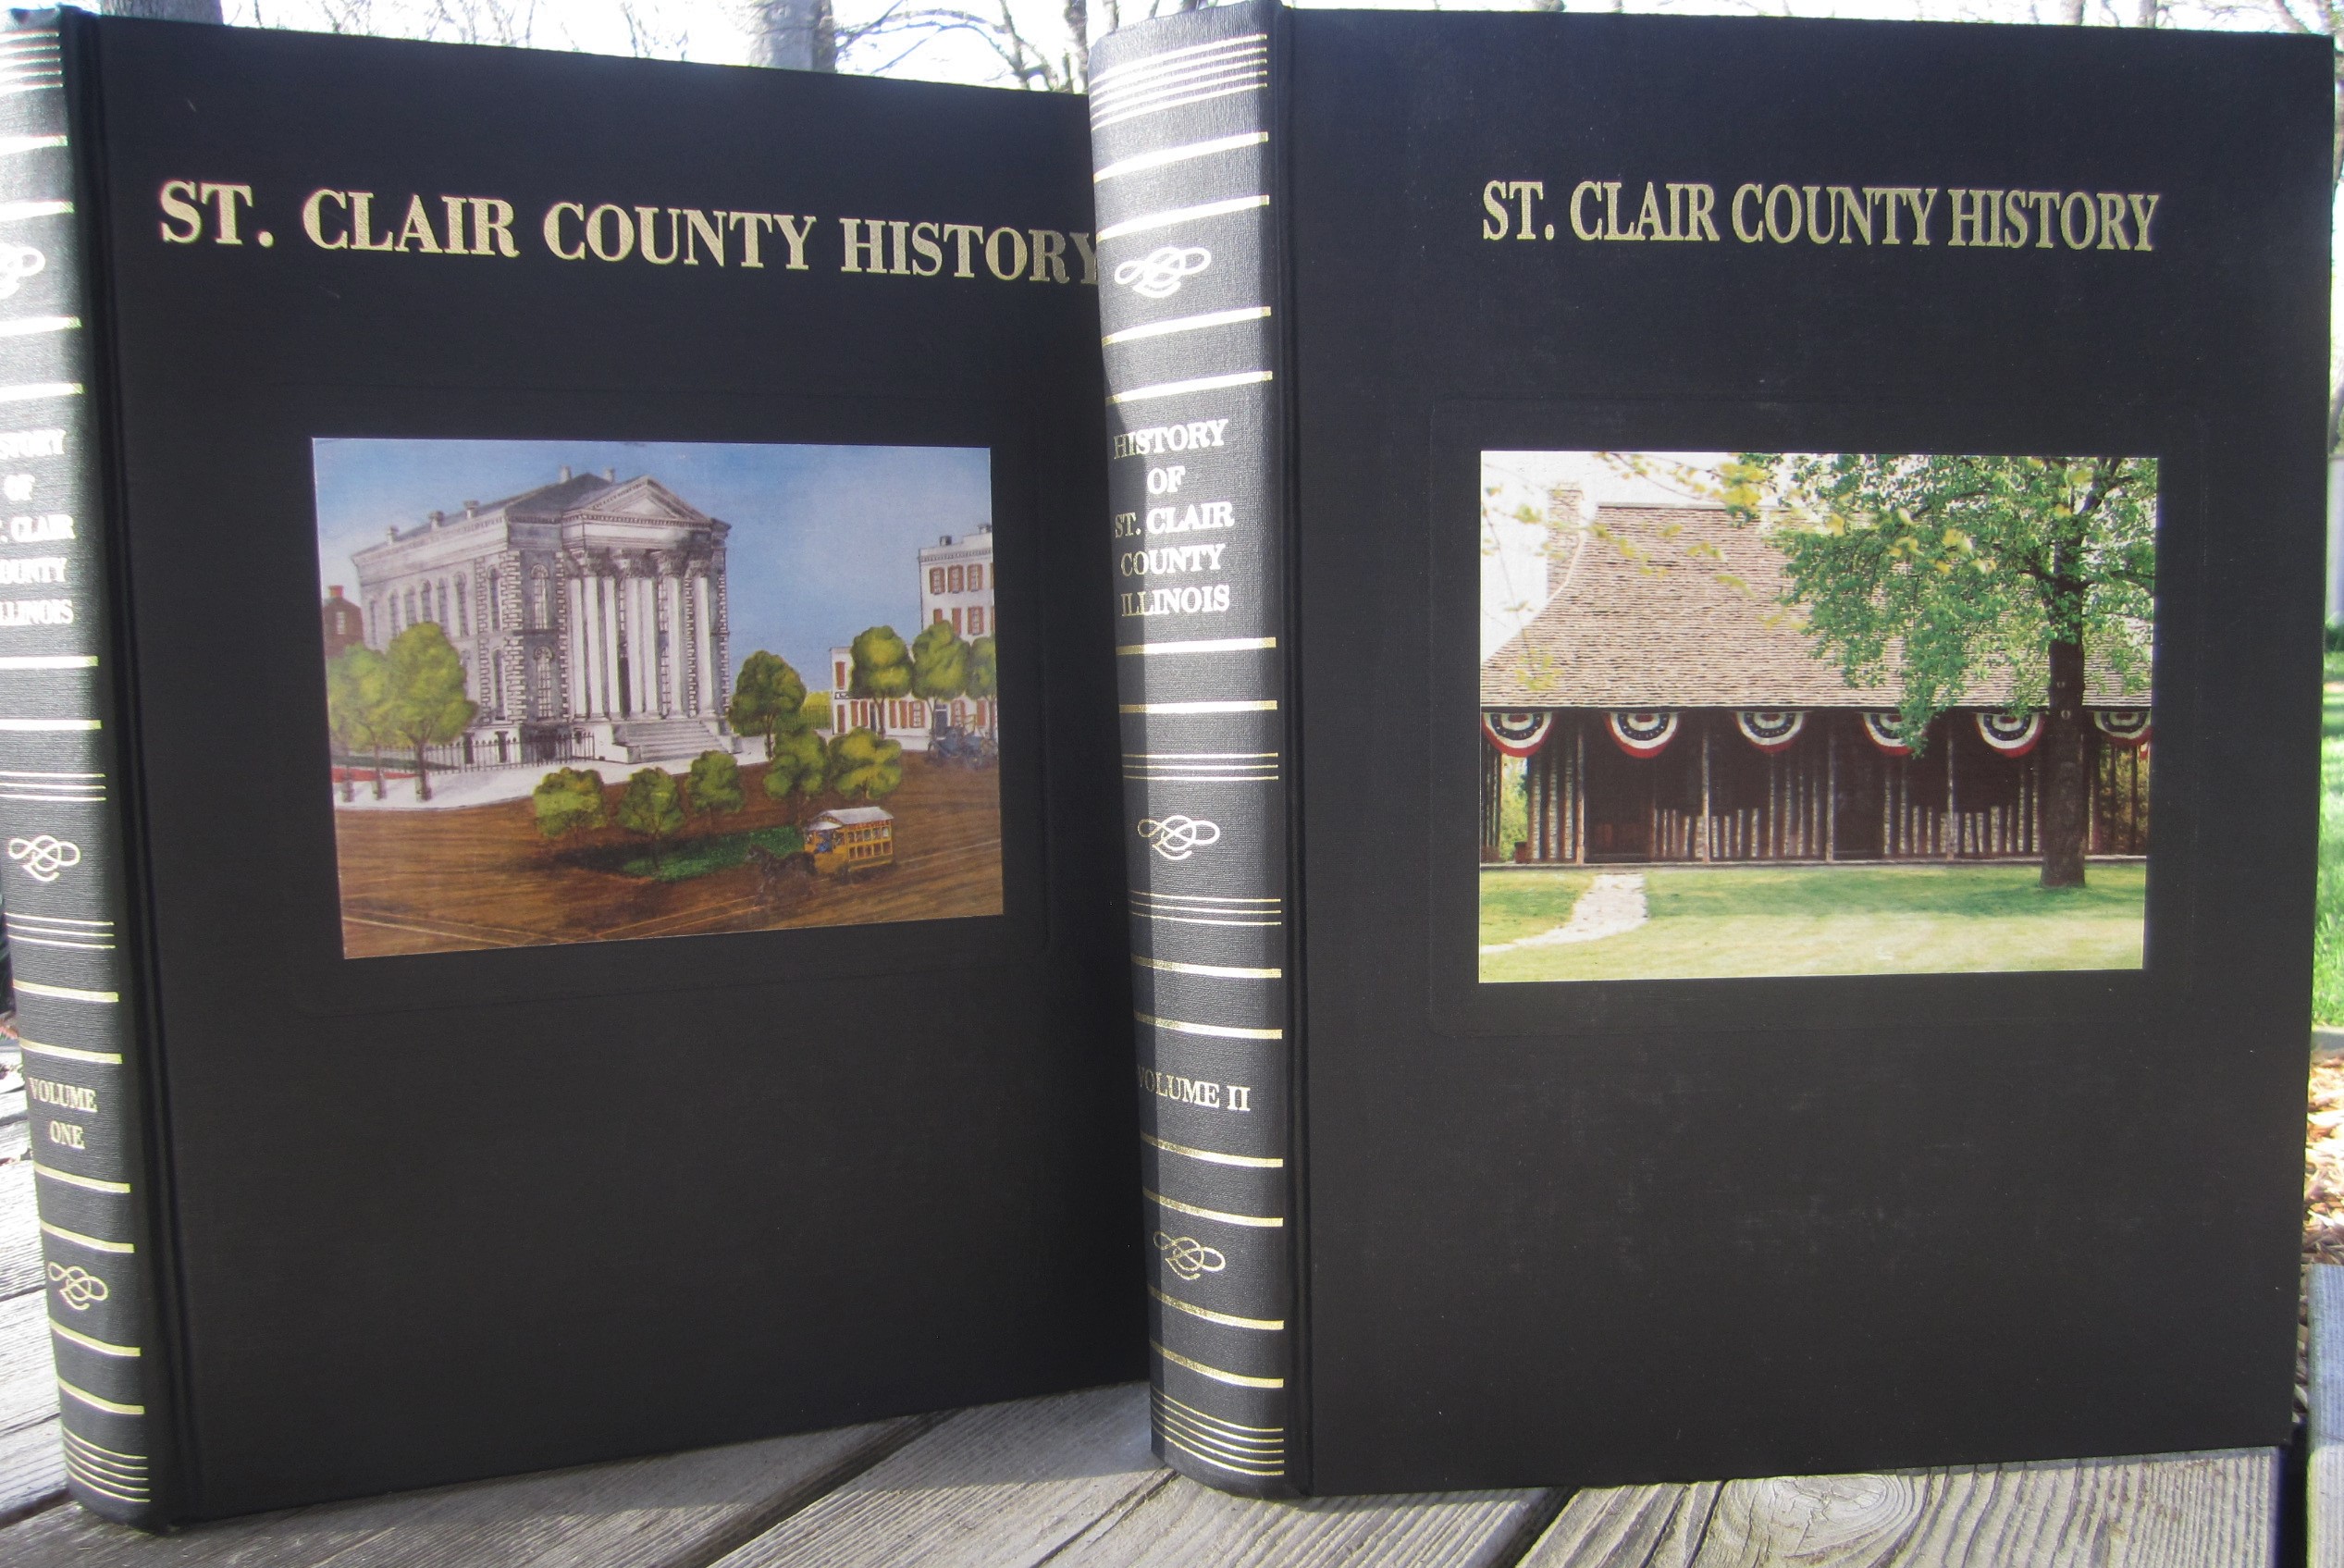 St. Clair County History, Volume I (1988), Volume II (1992) book covers feature color photos of the courthouse at Cahokia and Belleville